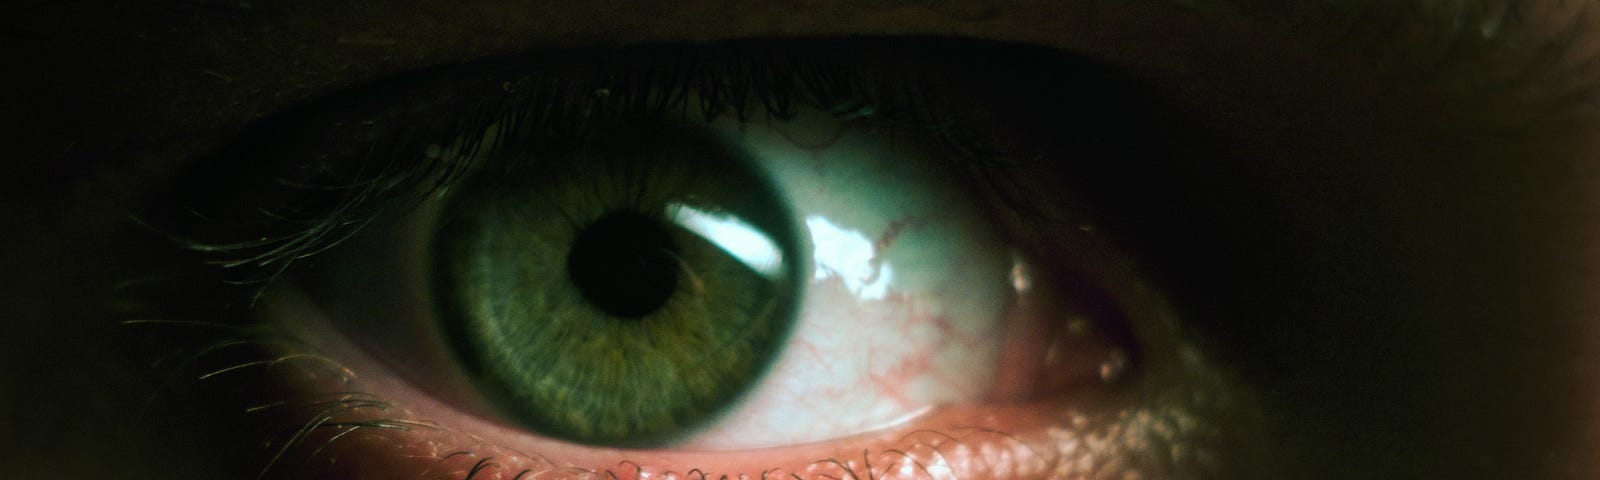 A close up picture of a green eye staring out from the darkness.